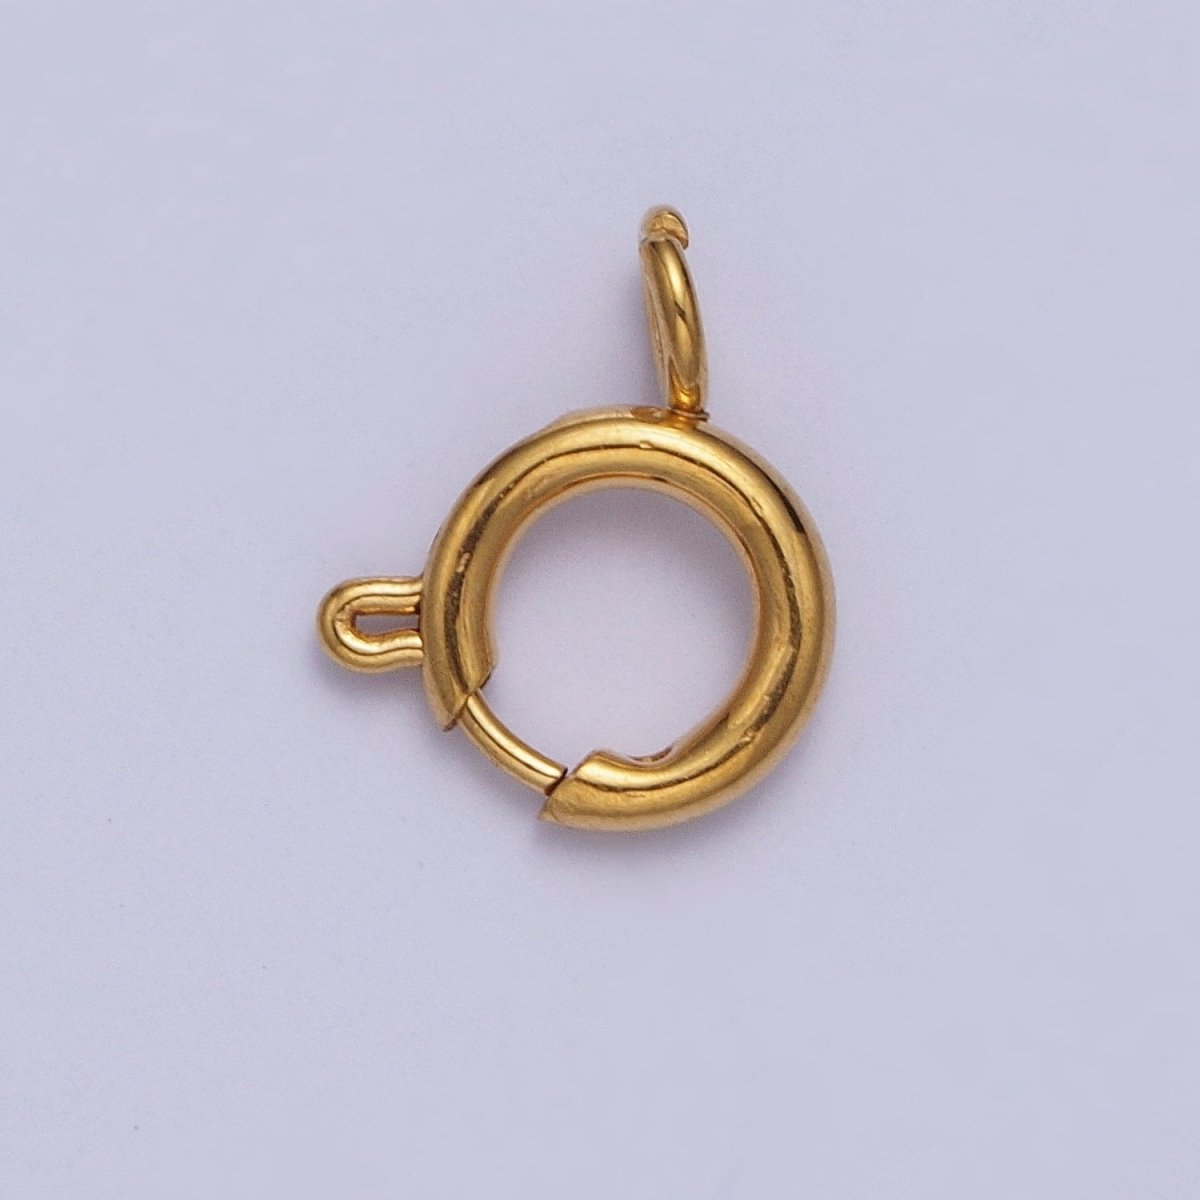 24K Gold Filled Round Spring Ring Closure Clasps For DIY Jewelry Making L-892-L-899 L-905 - DLUXCA